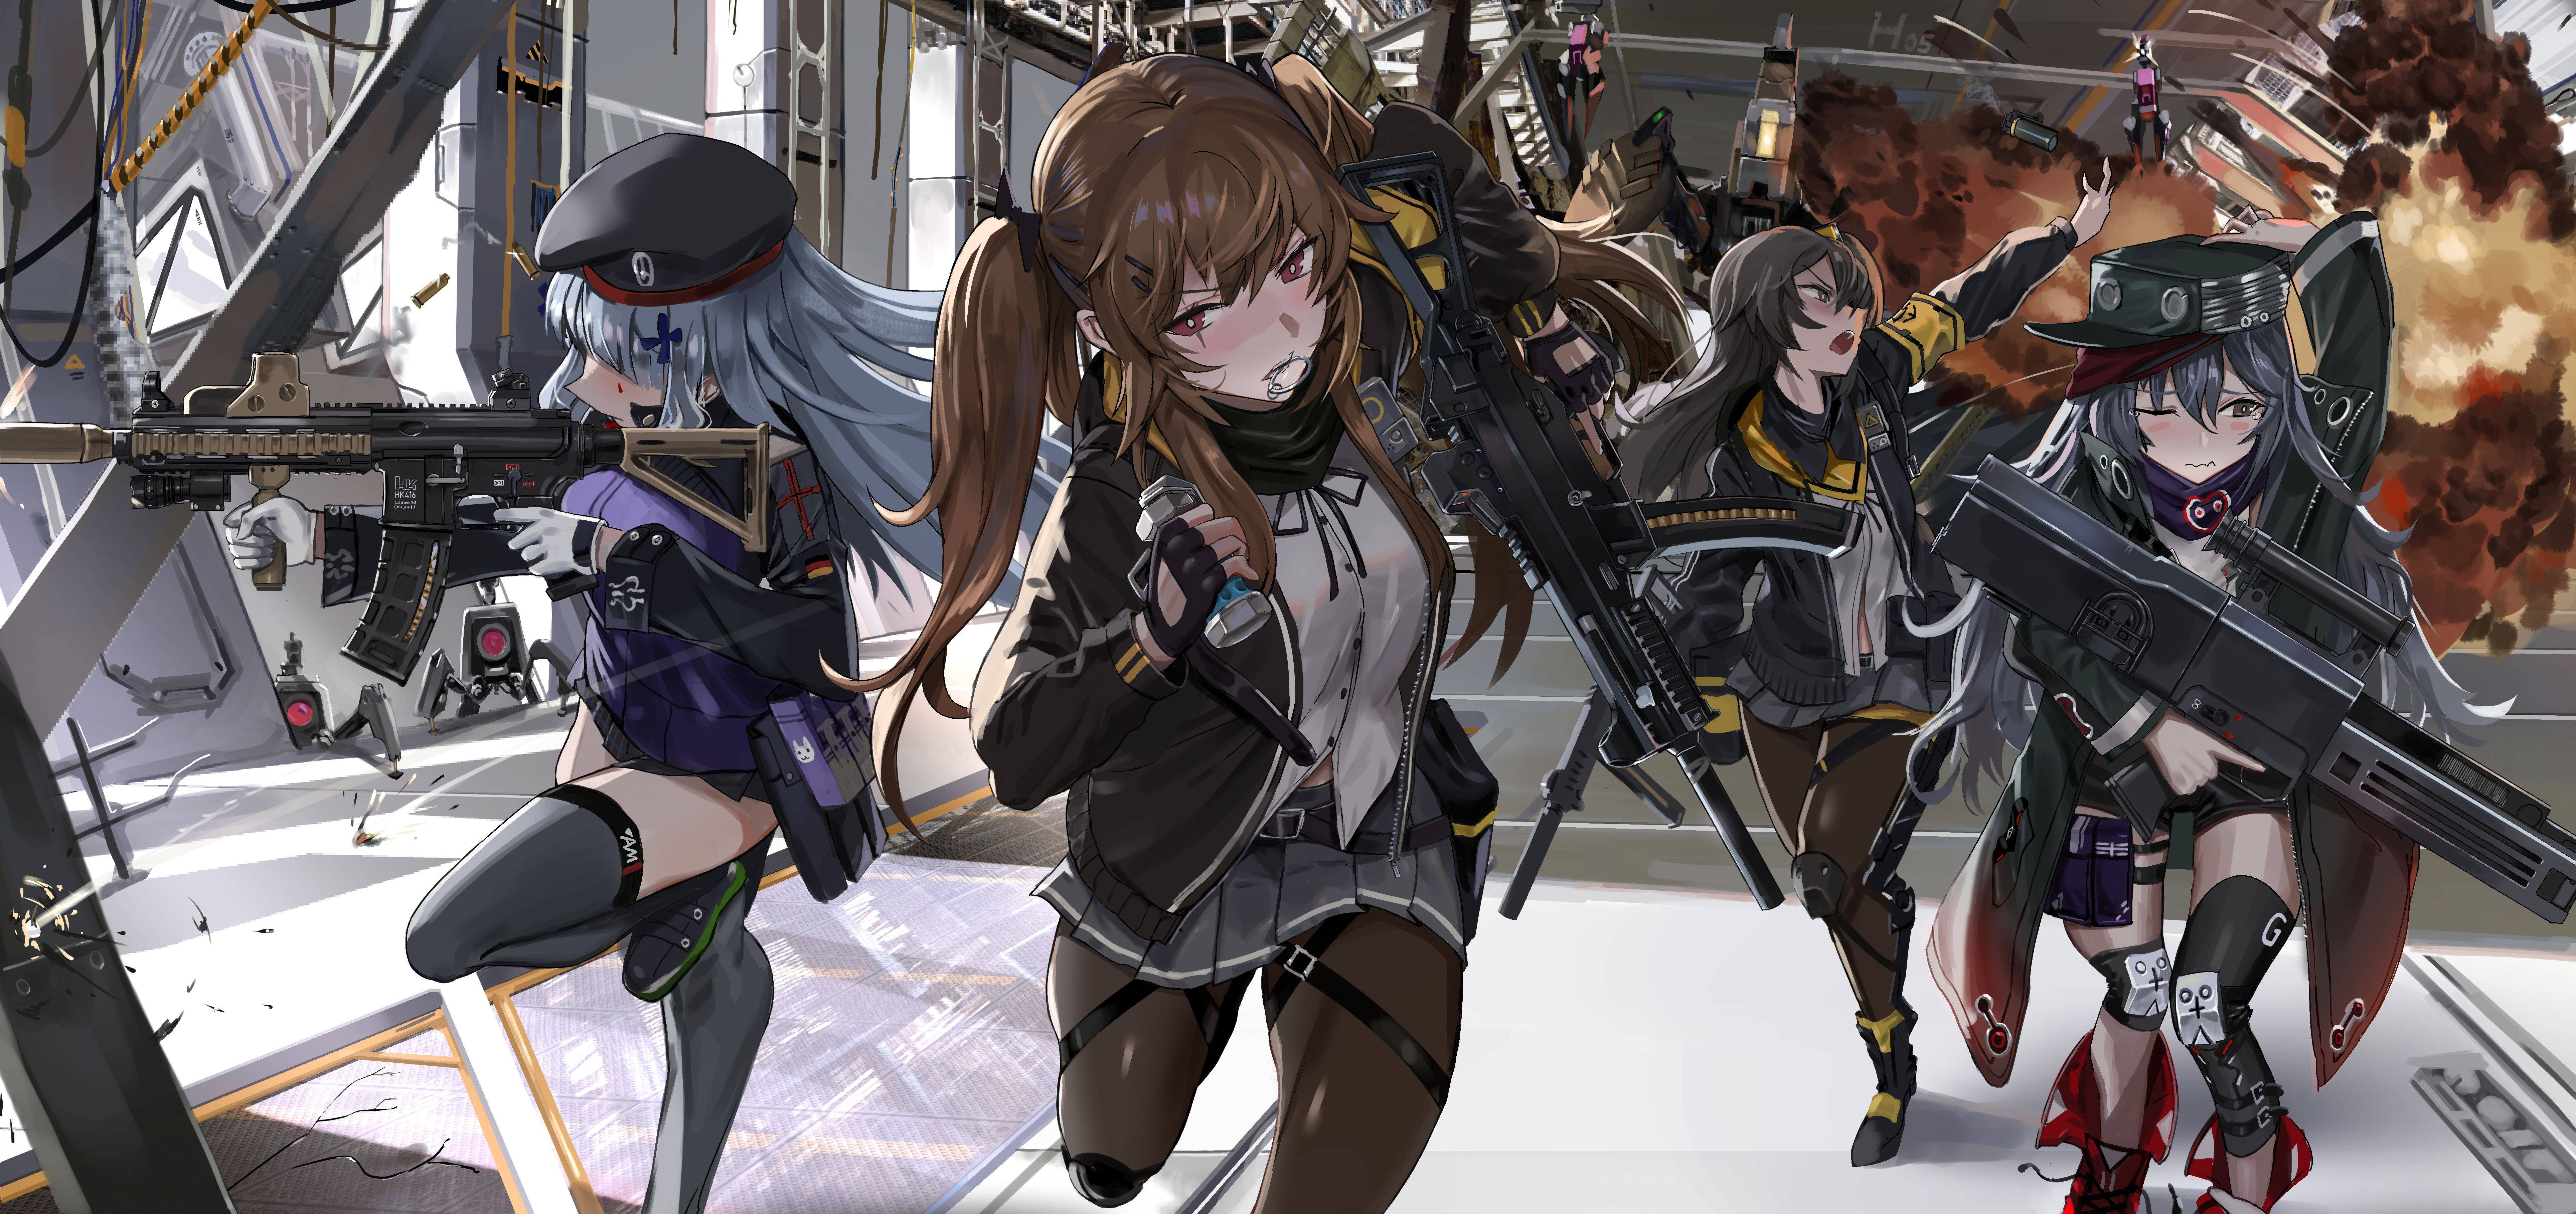 Download Girls Frontline Characters On Attack Wallpaper | Wallpapers.com